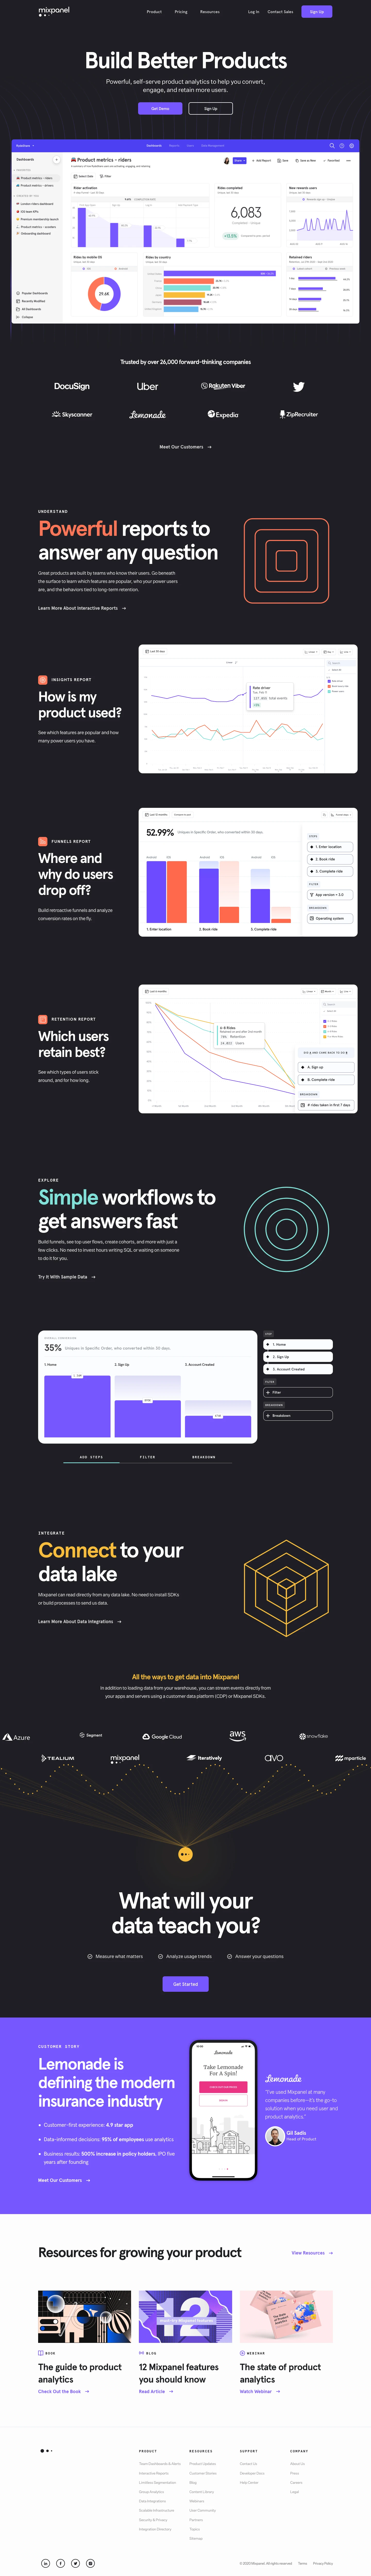 Mixpanel Landing Page Example: Powerful, self-serve product analytics to help you convert, engage, and retain more users.